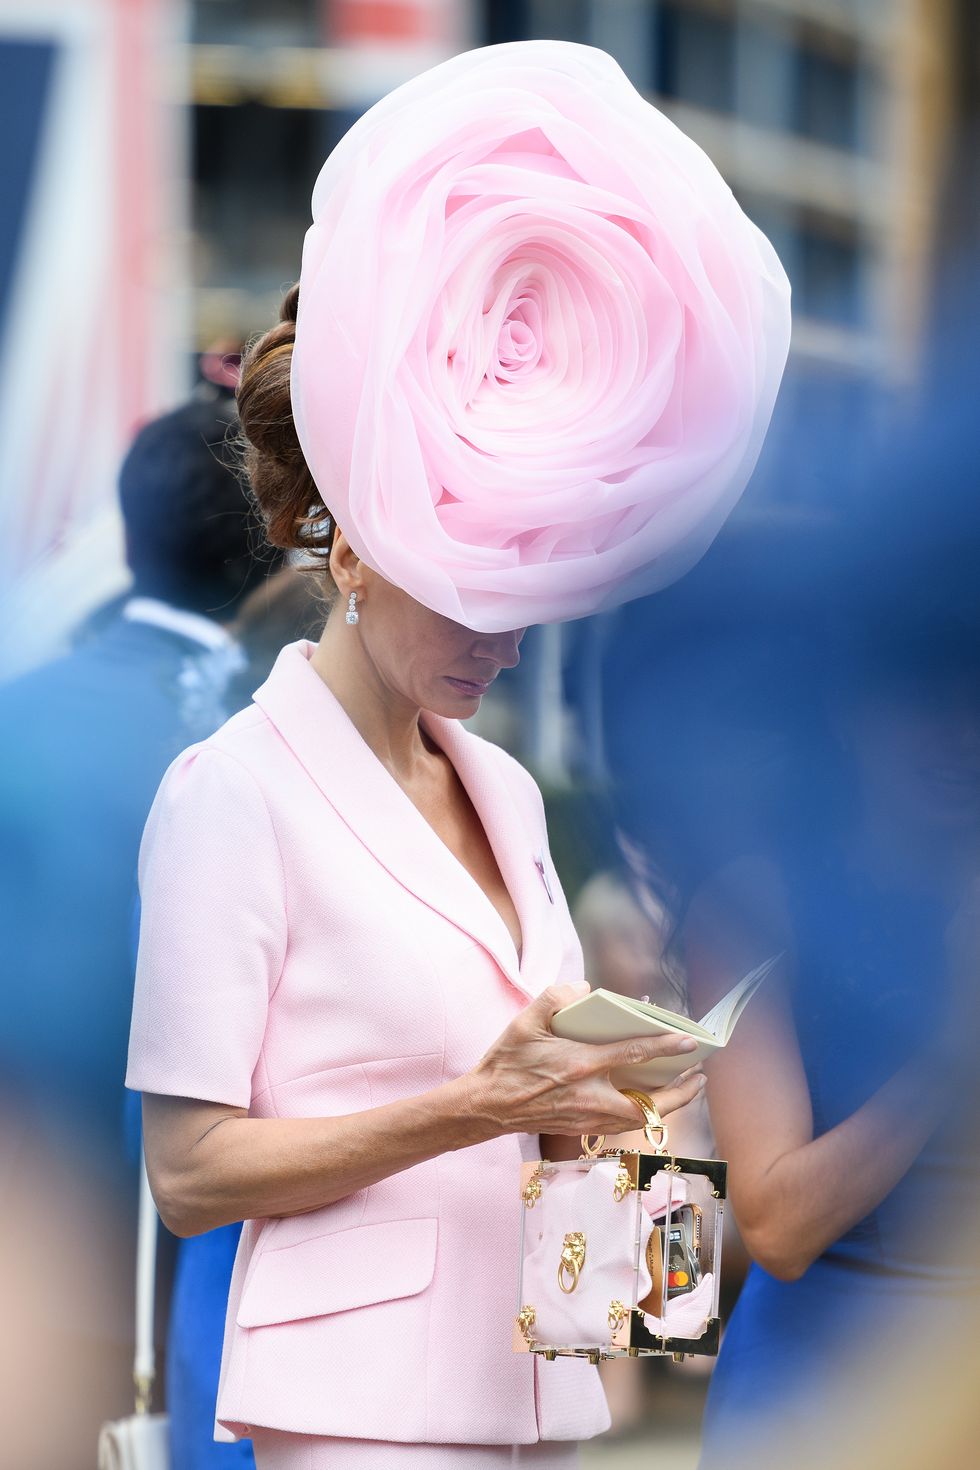 https://hips.hearstapps.com/hmg-prod.s3.amazonaws.com/images/hbz-royal-ascot-hats-gettyimages-978597212-1529432663.jpg?crop=1xw:1xh;center,top&resize=980:*